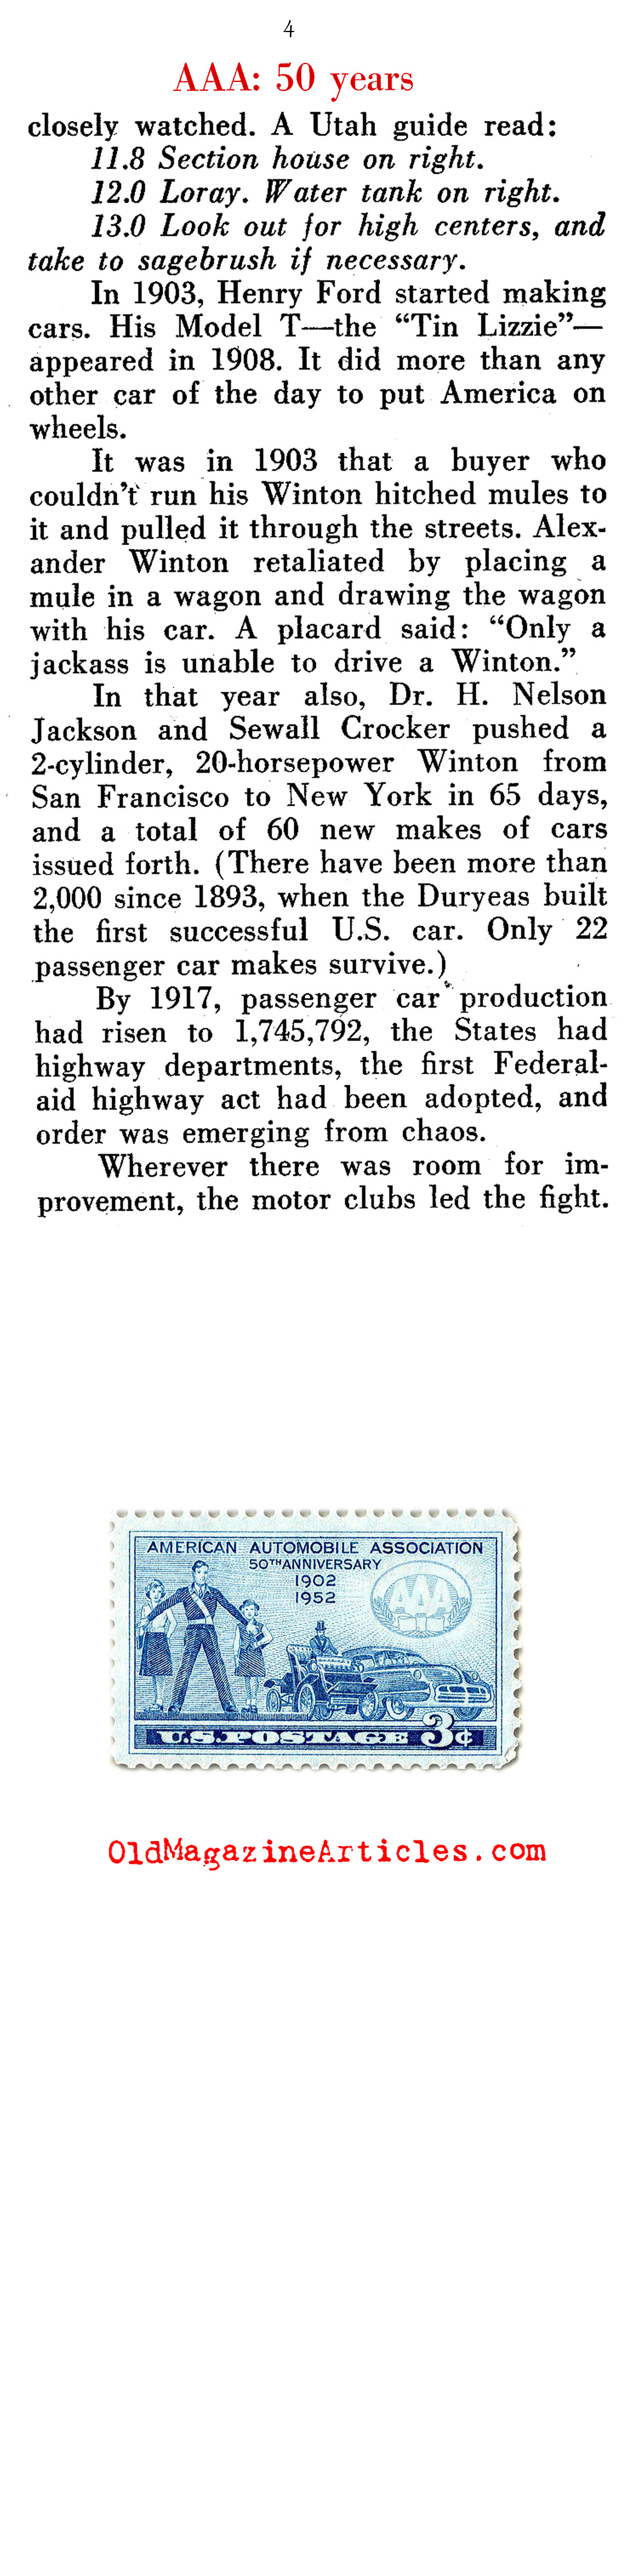 The First Fifty-Years Behind the Wheel (Pathfinder Magazine, 1952)